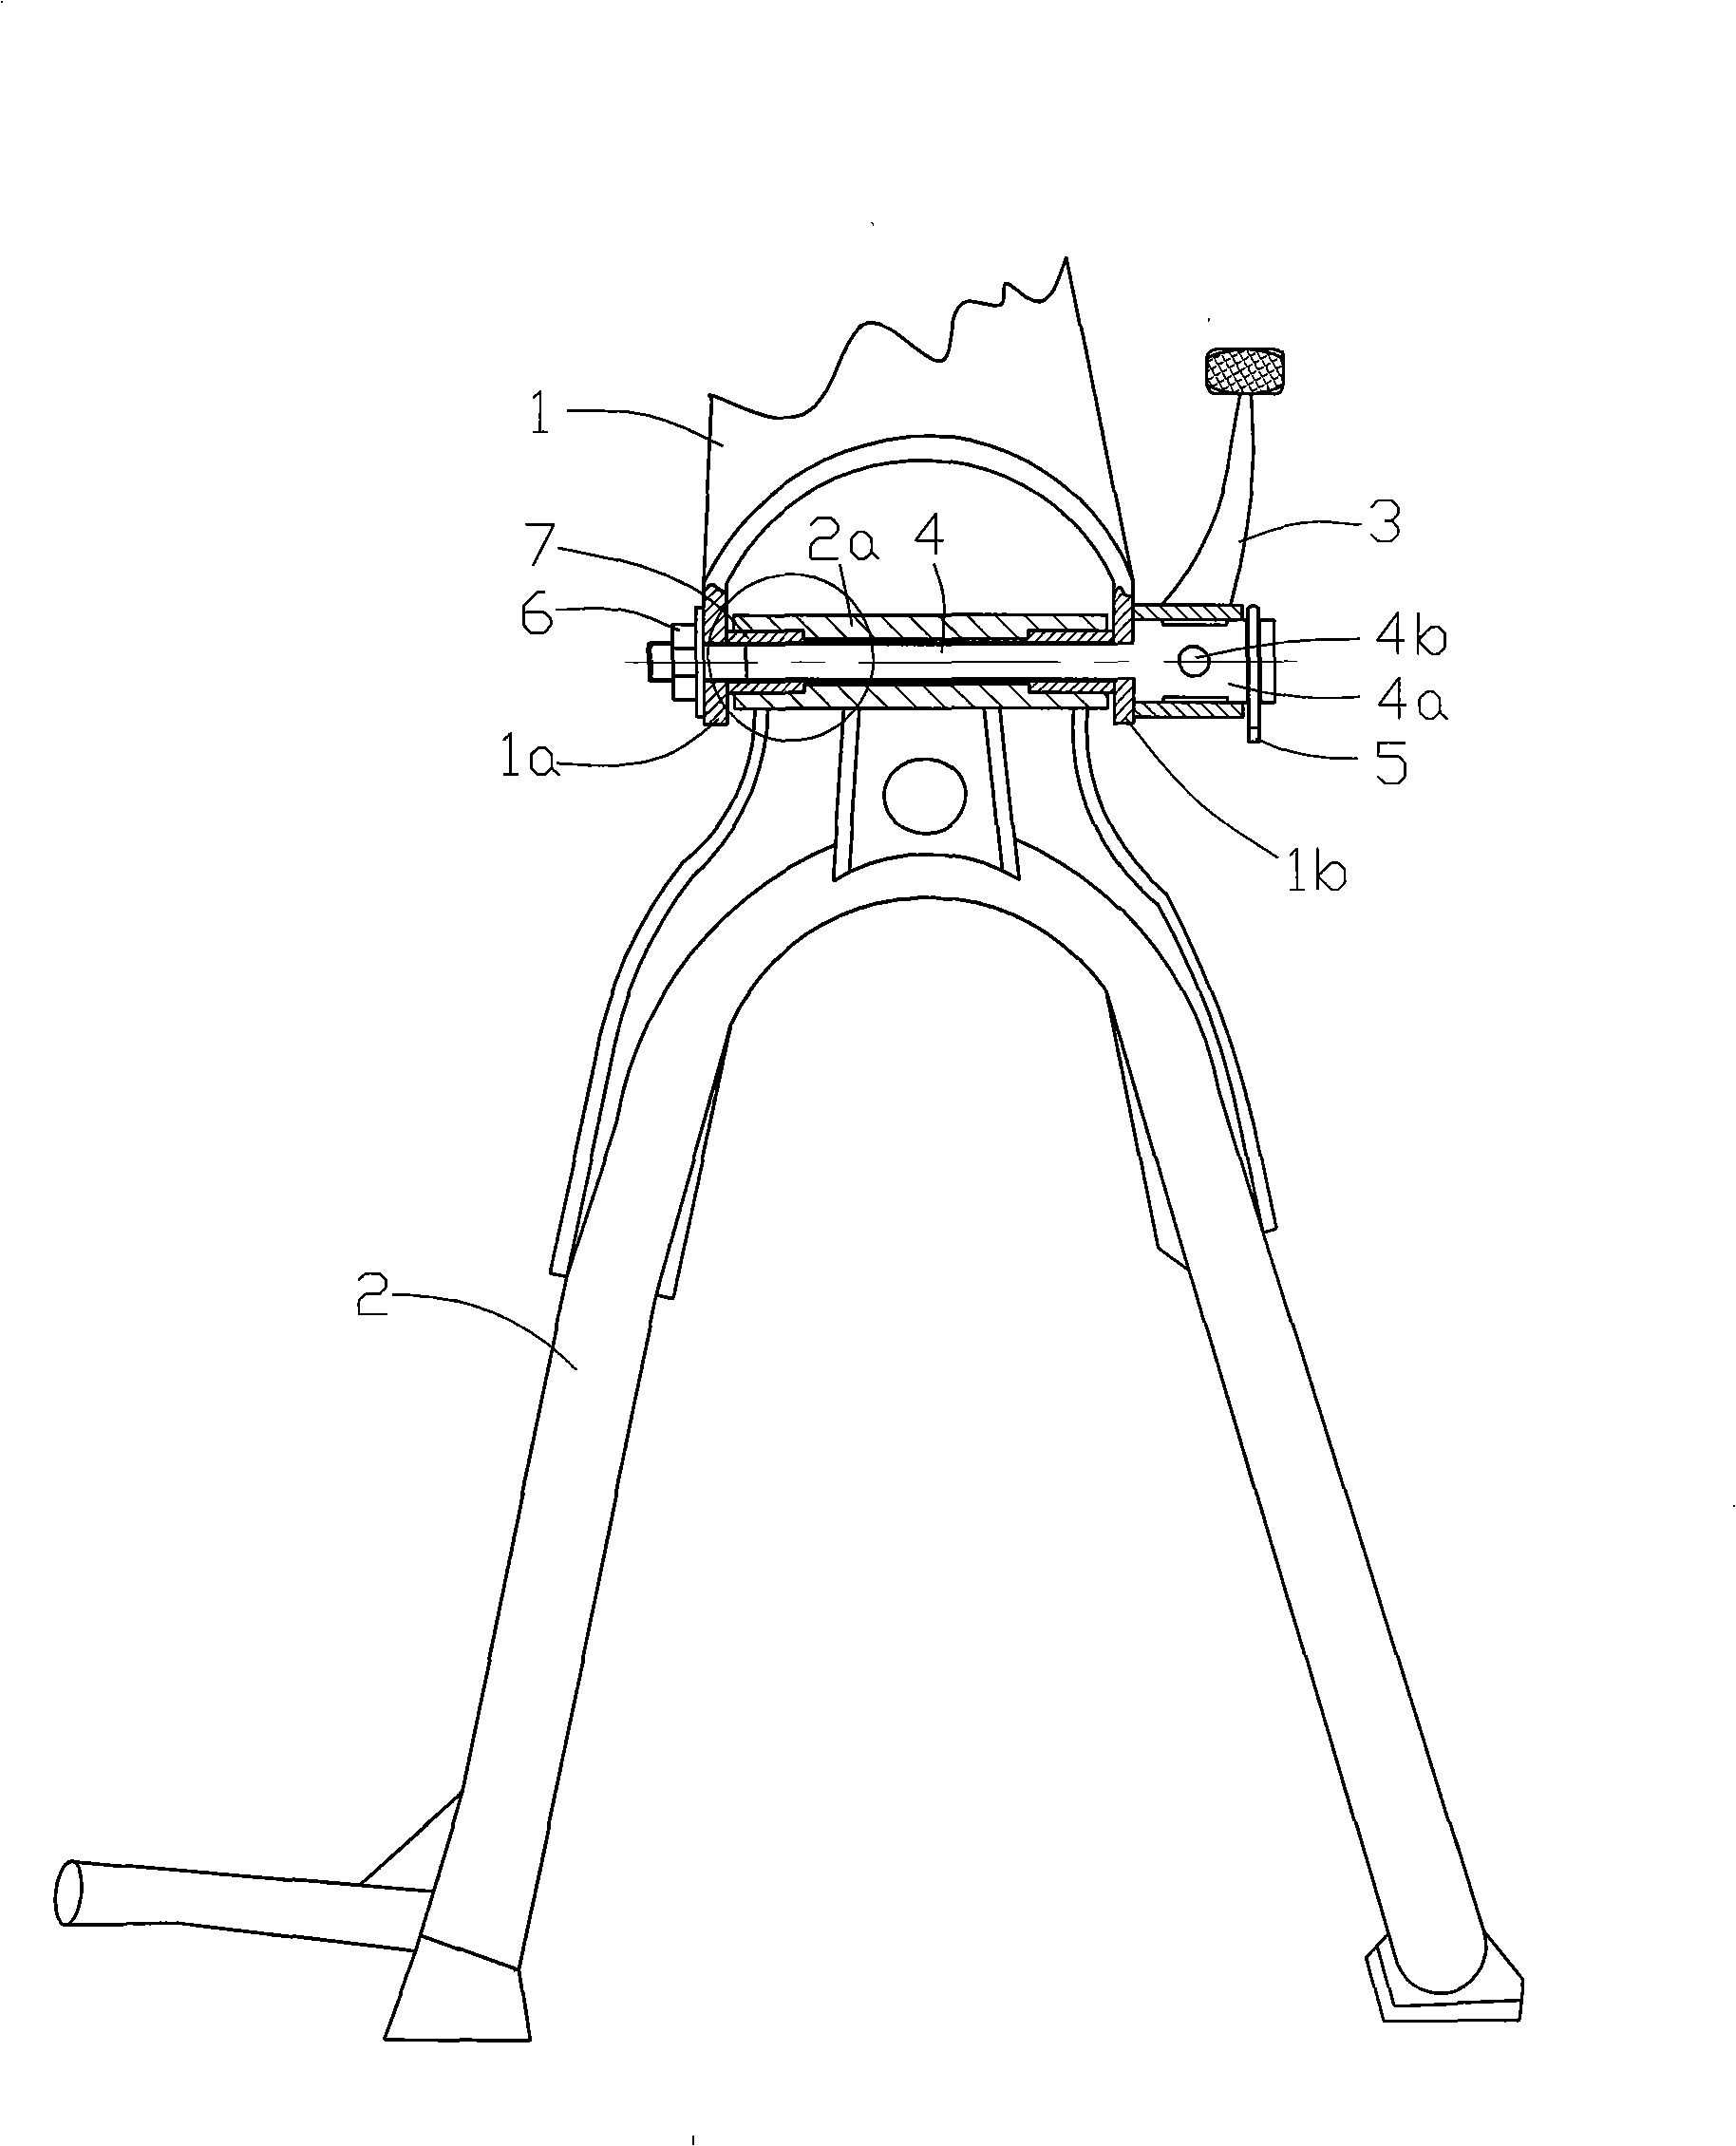 Connection device for primary stand frame and vehicle frame of two-wheel motorcycle